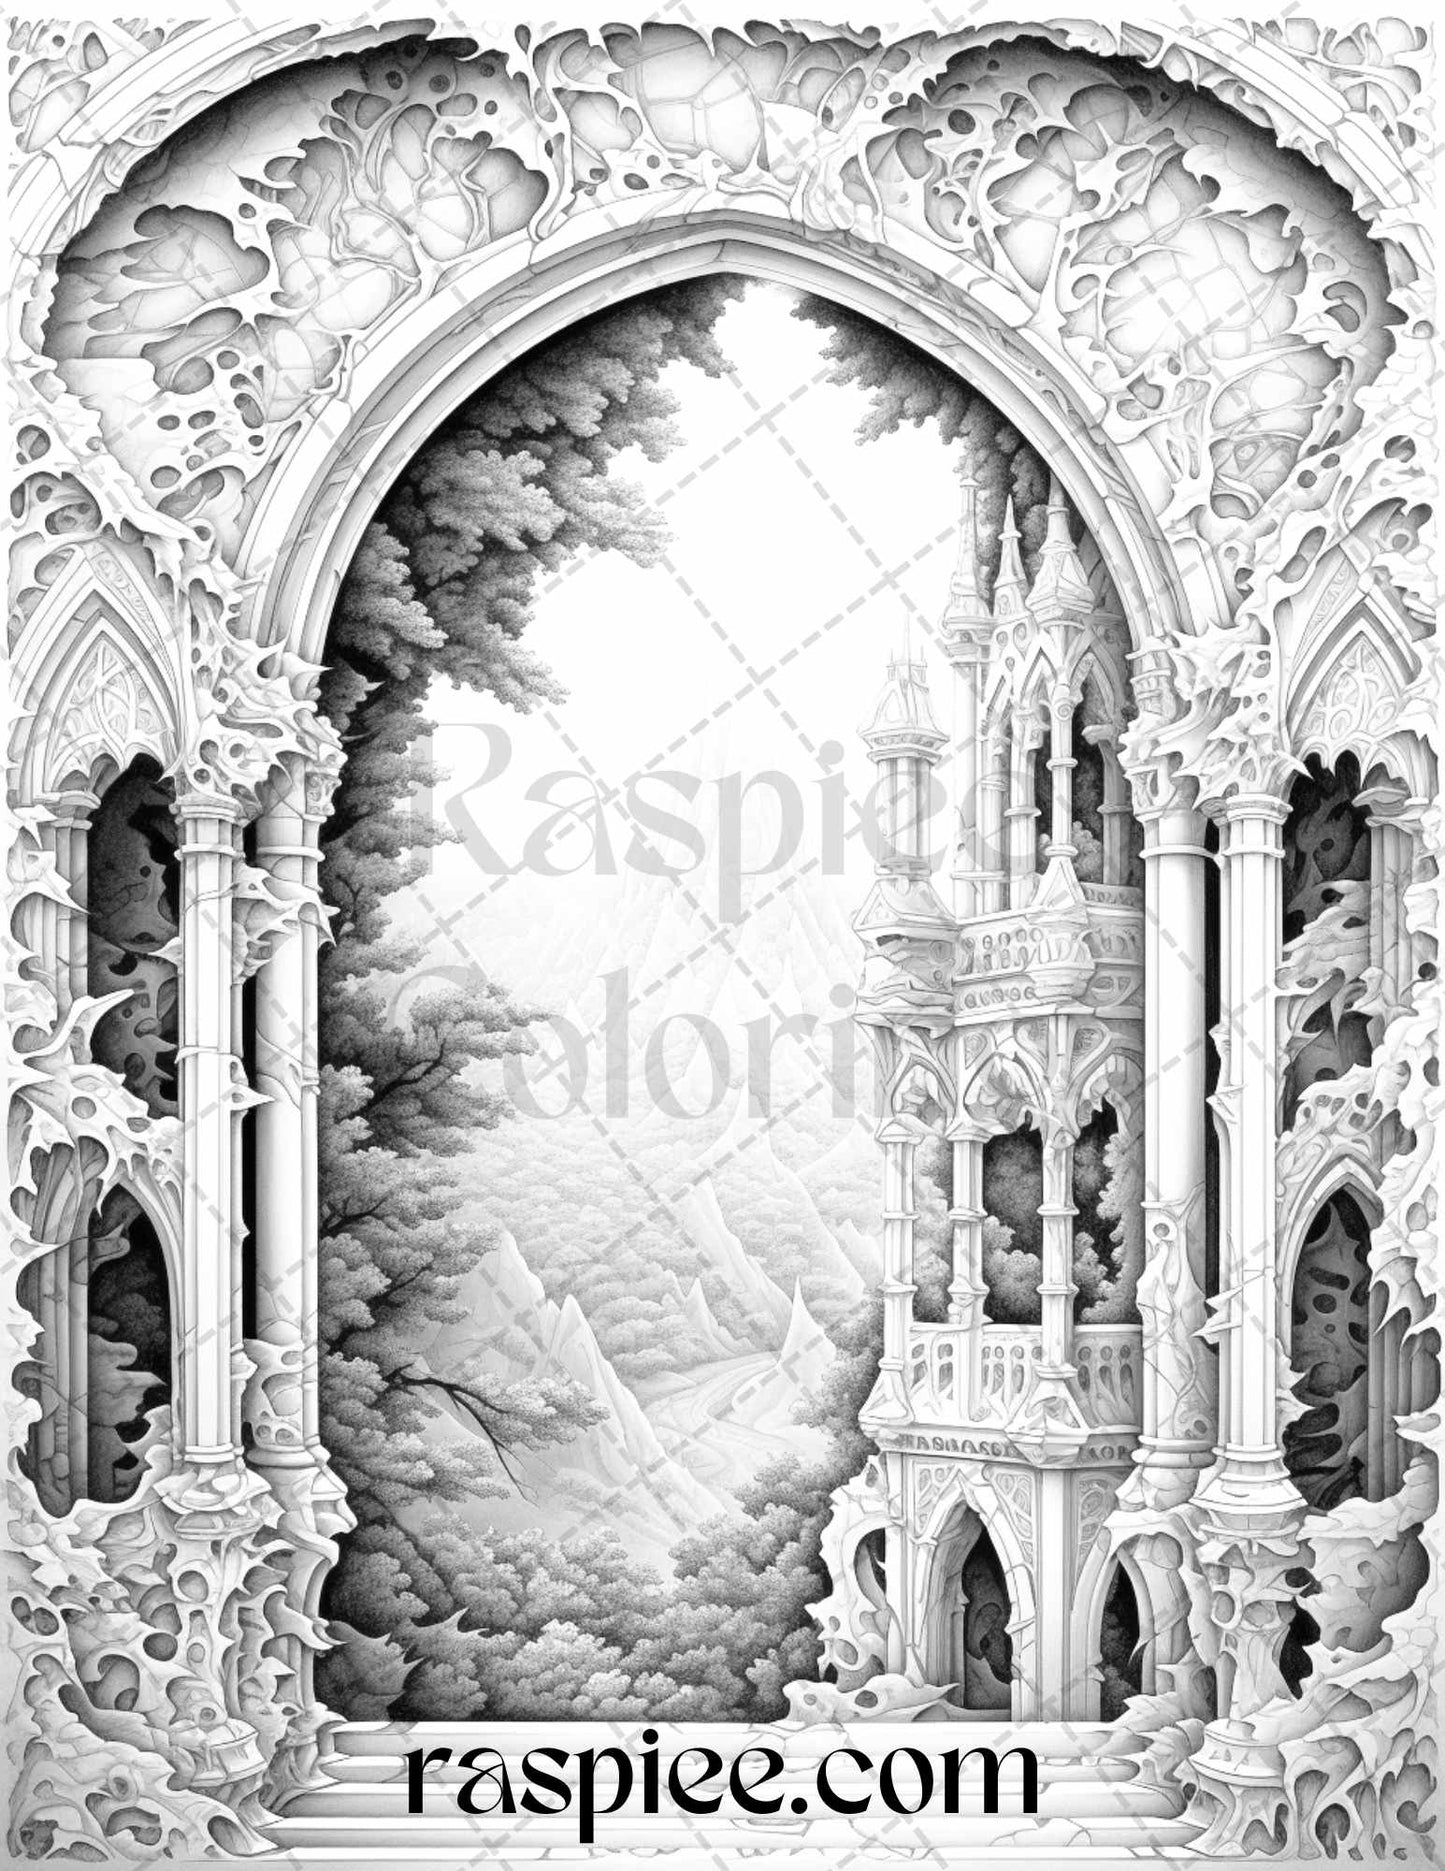 40 Window to Fantasy Worlds Grayscale Coloring Pages Printable for Adults, PDF File Instant Download - raspiee